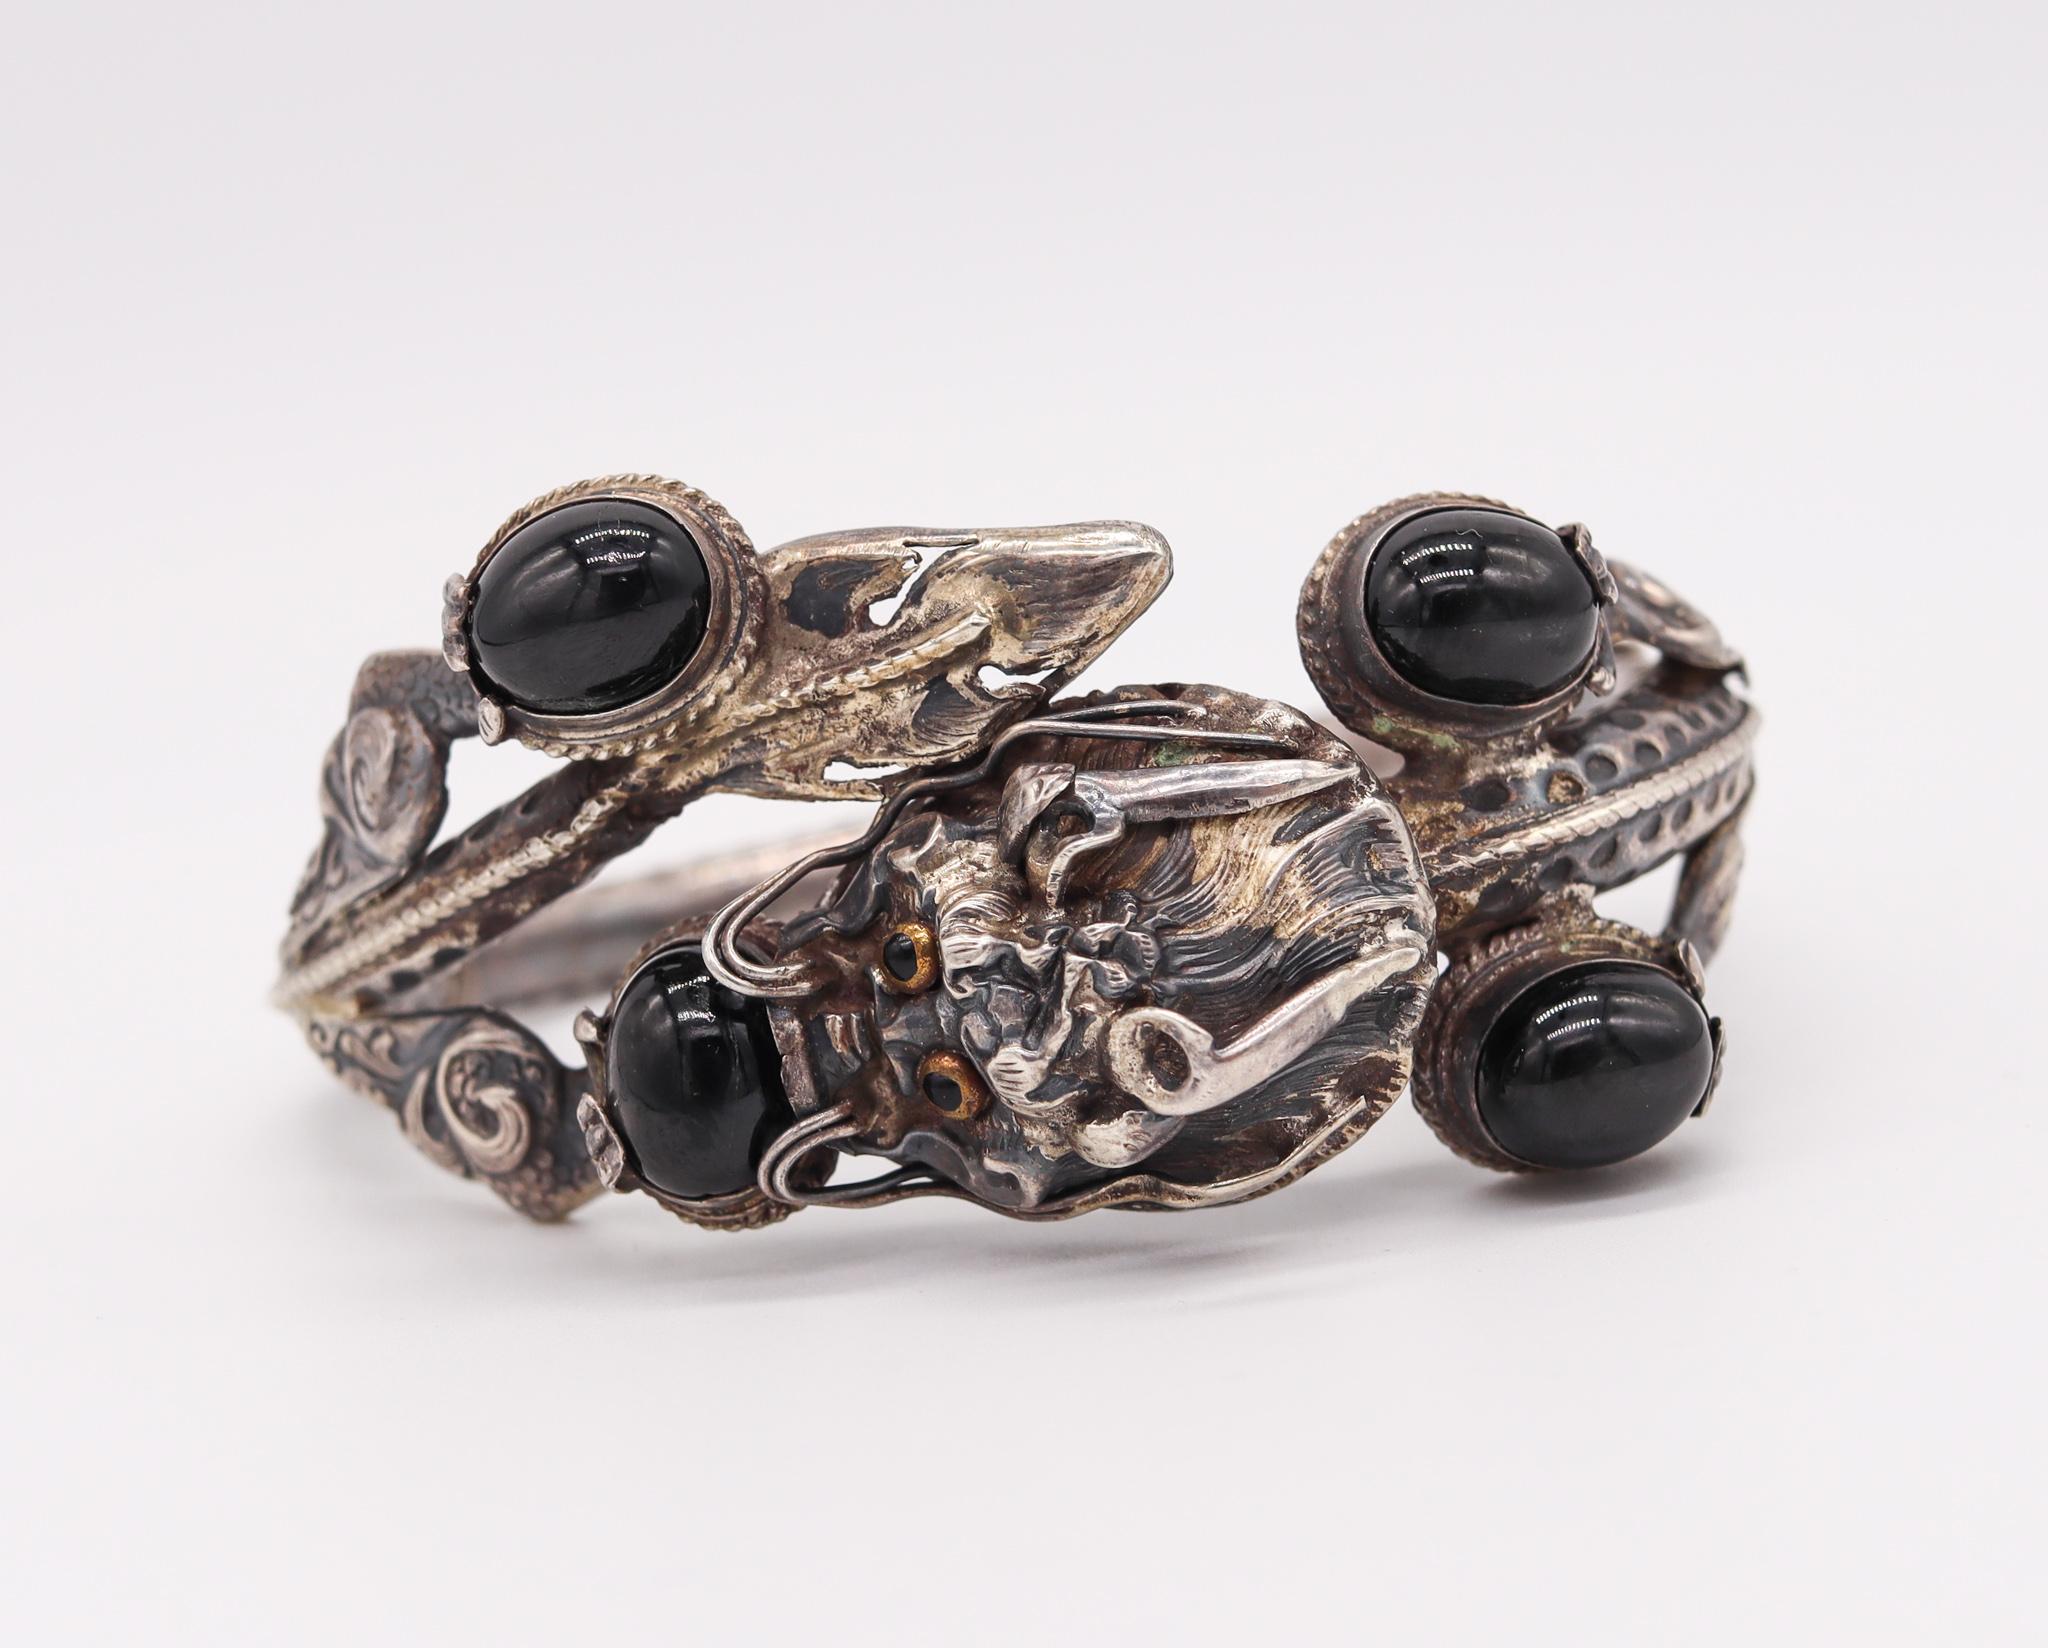 Chinese exportation dragon Victorian bracelet.

Beautiful piece, created in China for exportation during the Qing dynasty period (1644-1911), circa 1900. This three dimensional bracelet has been crafted in the western taste of the Victorian era